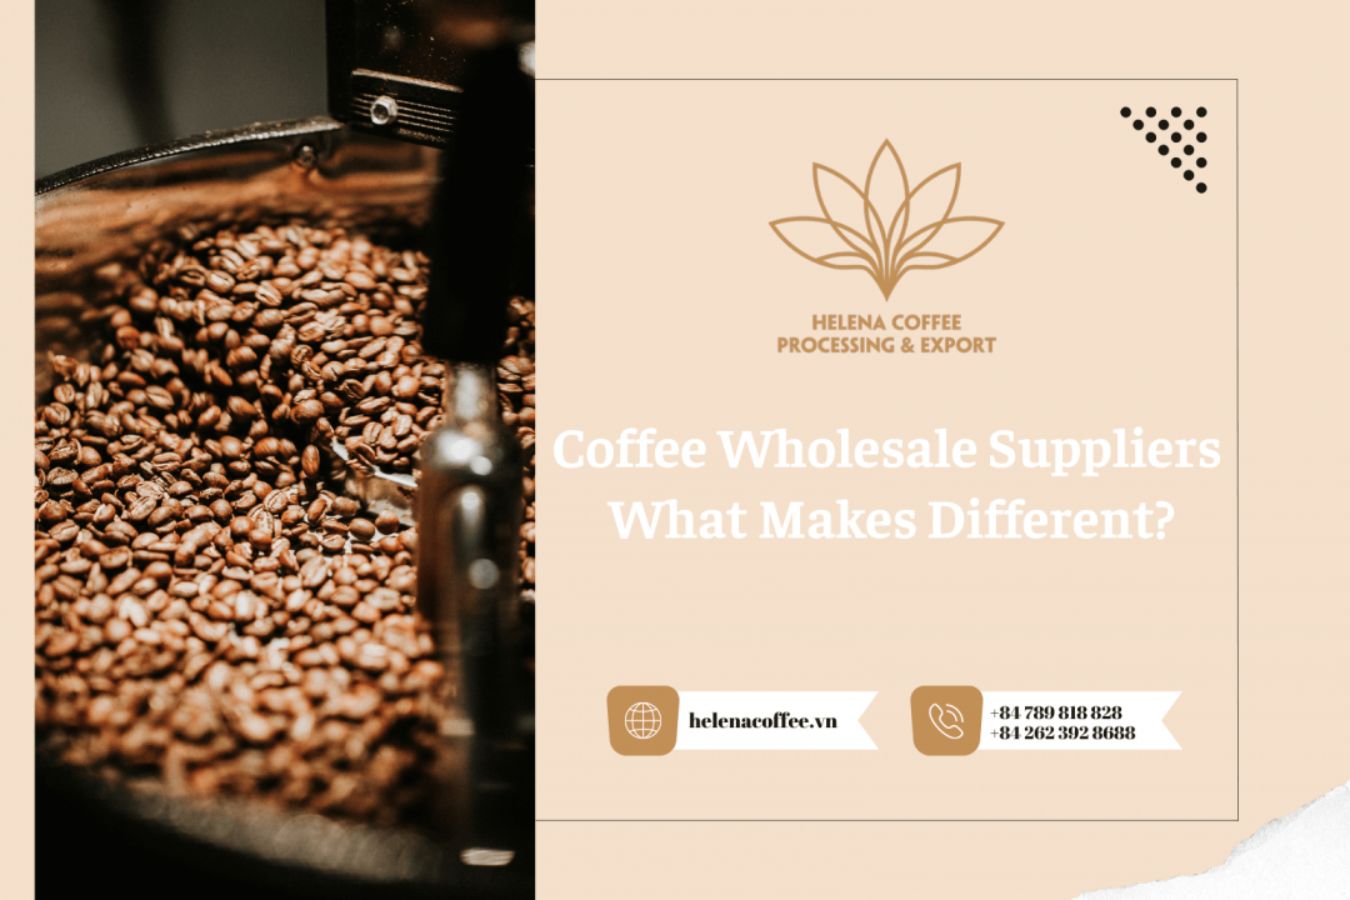 Coffee Wholesale Suppliers What Makes Different